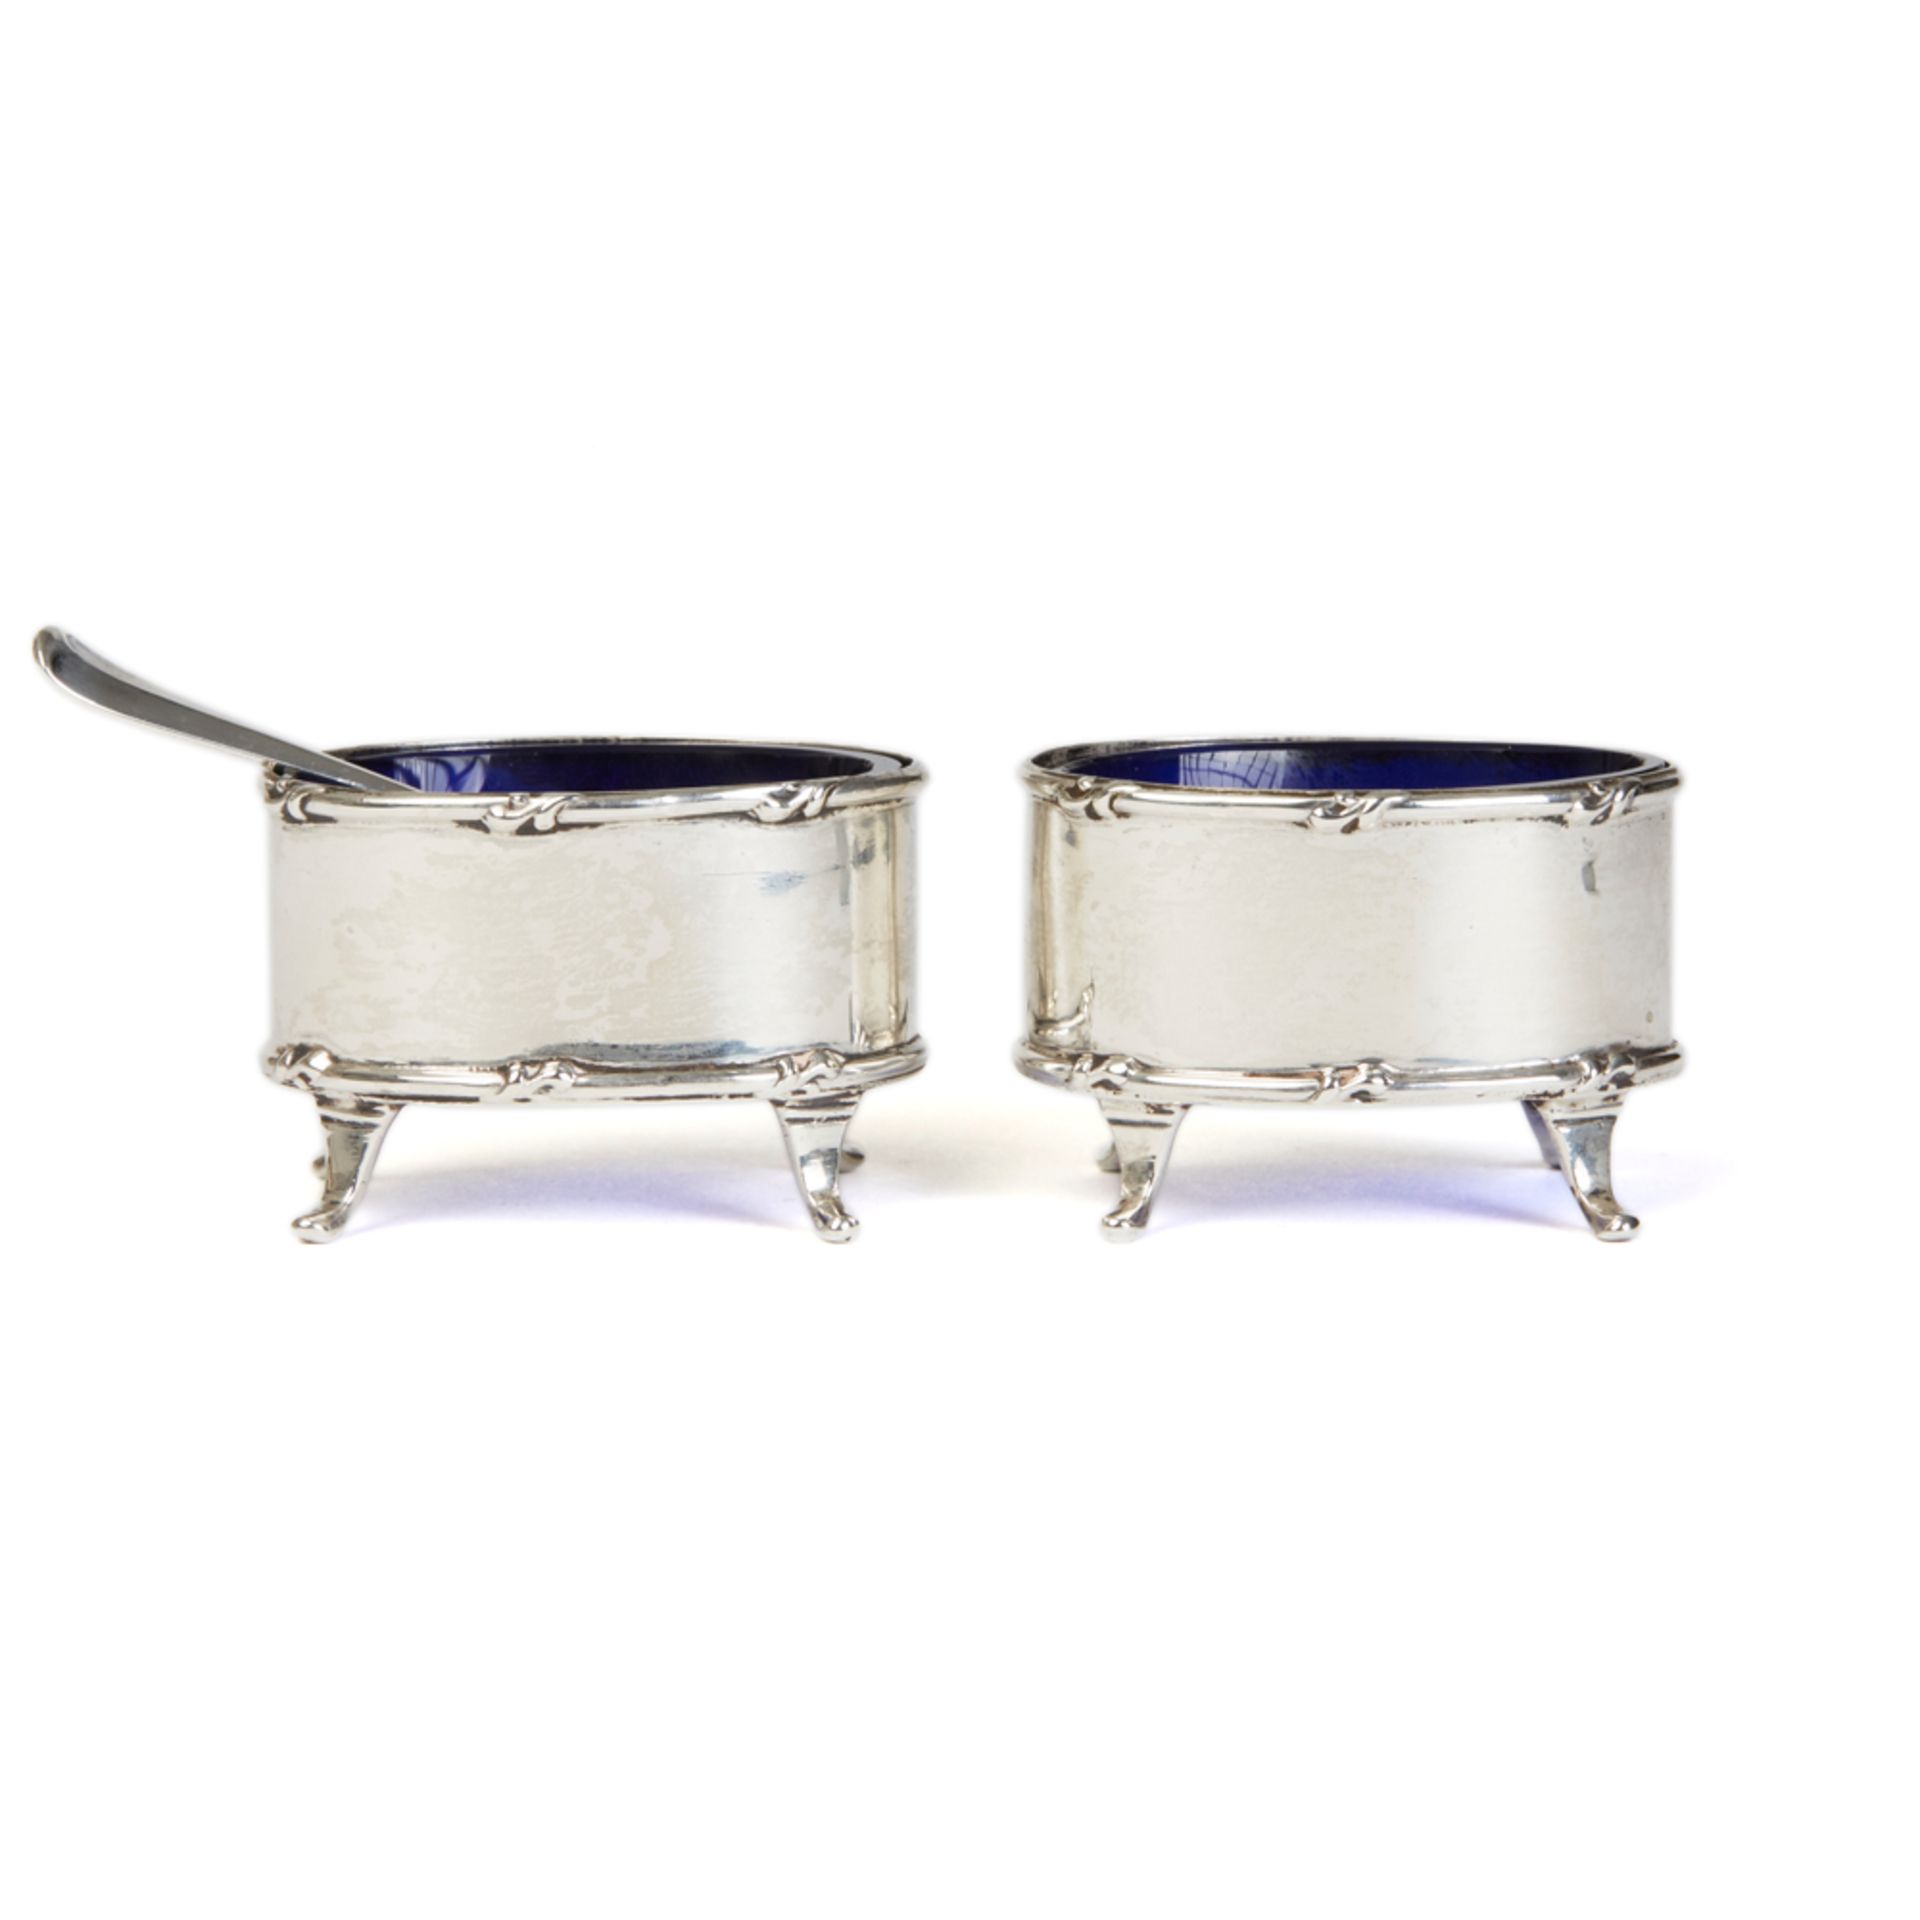 Pair Antique Silver & Blue Glass Salts Chester 1909 - Image 2 of 12